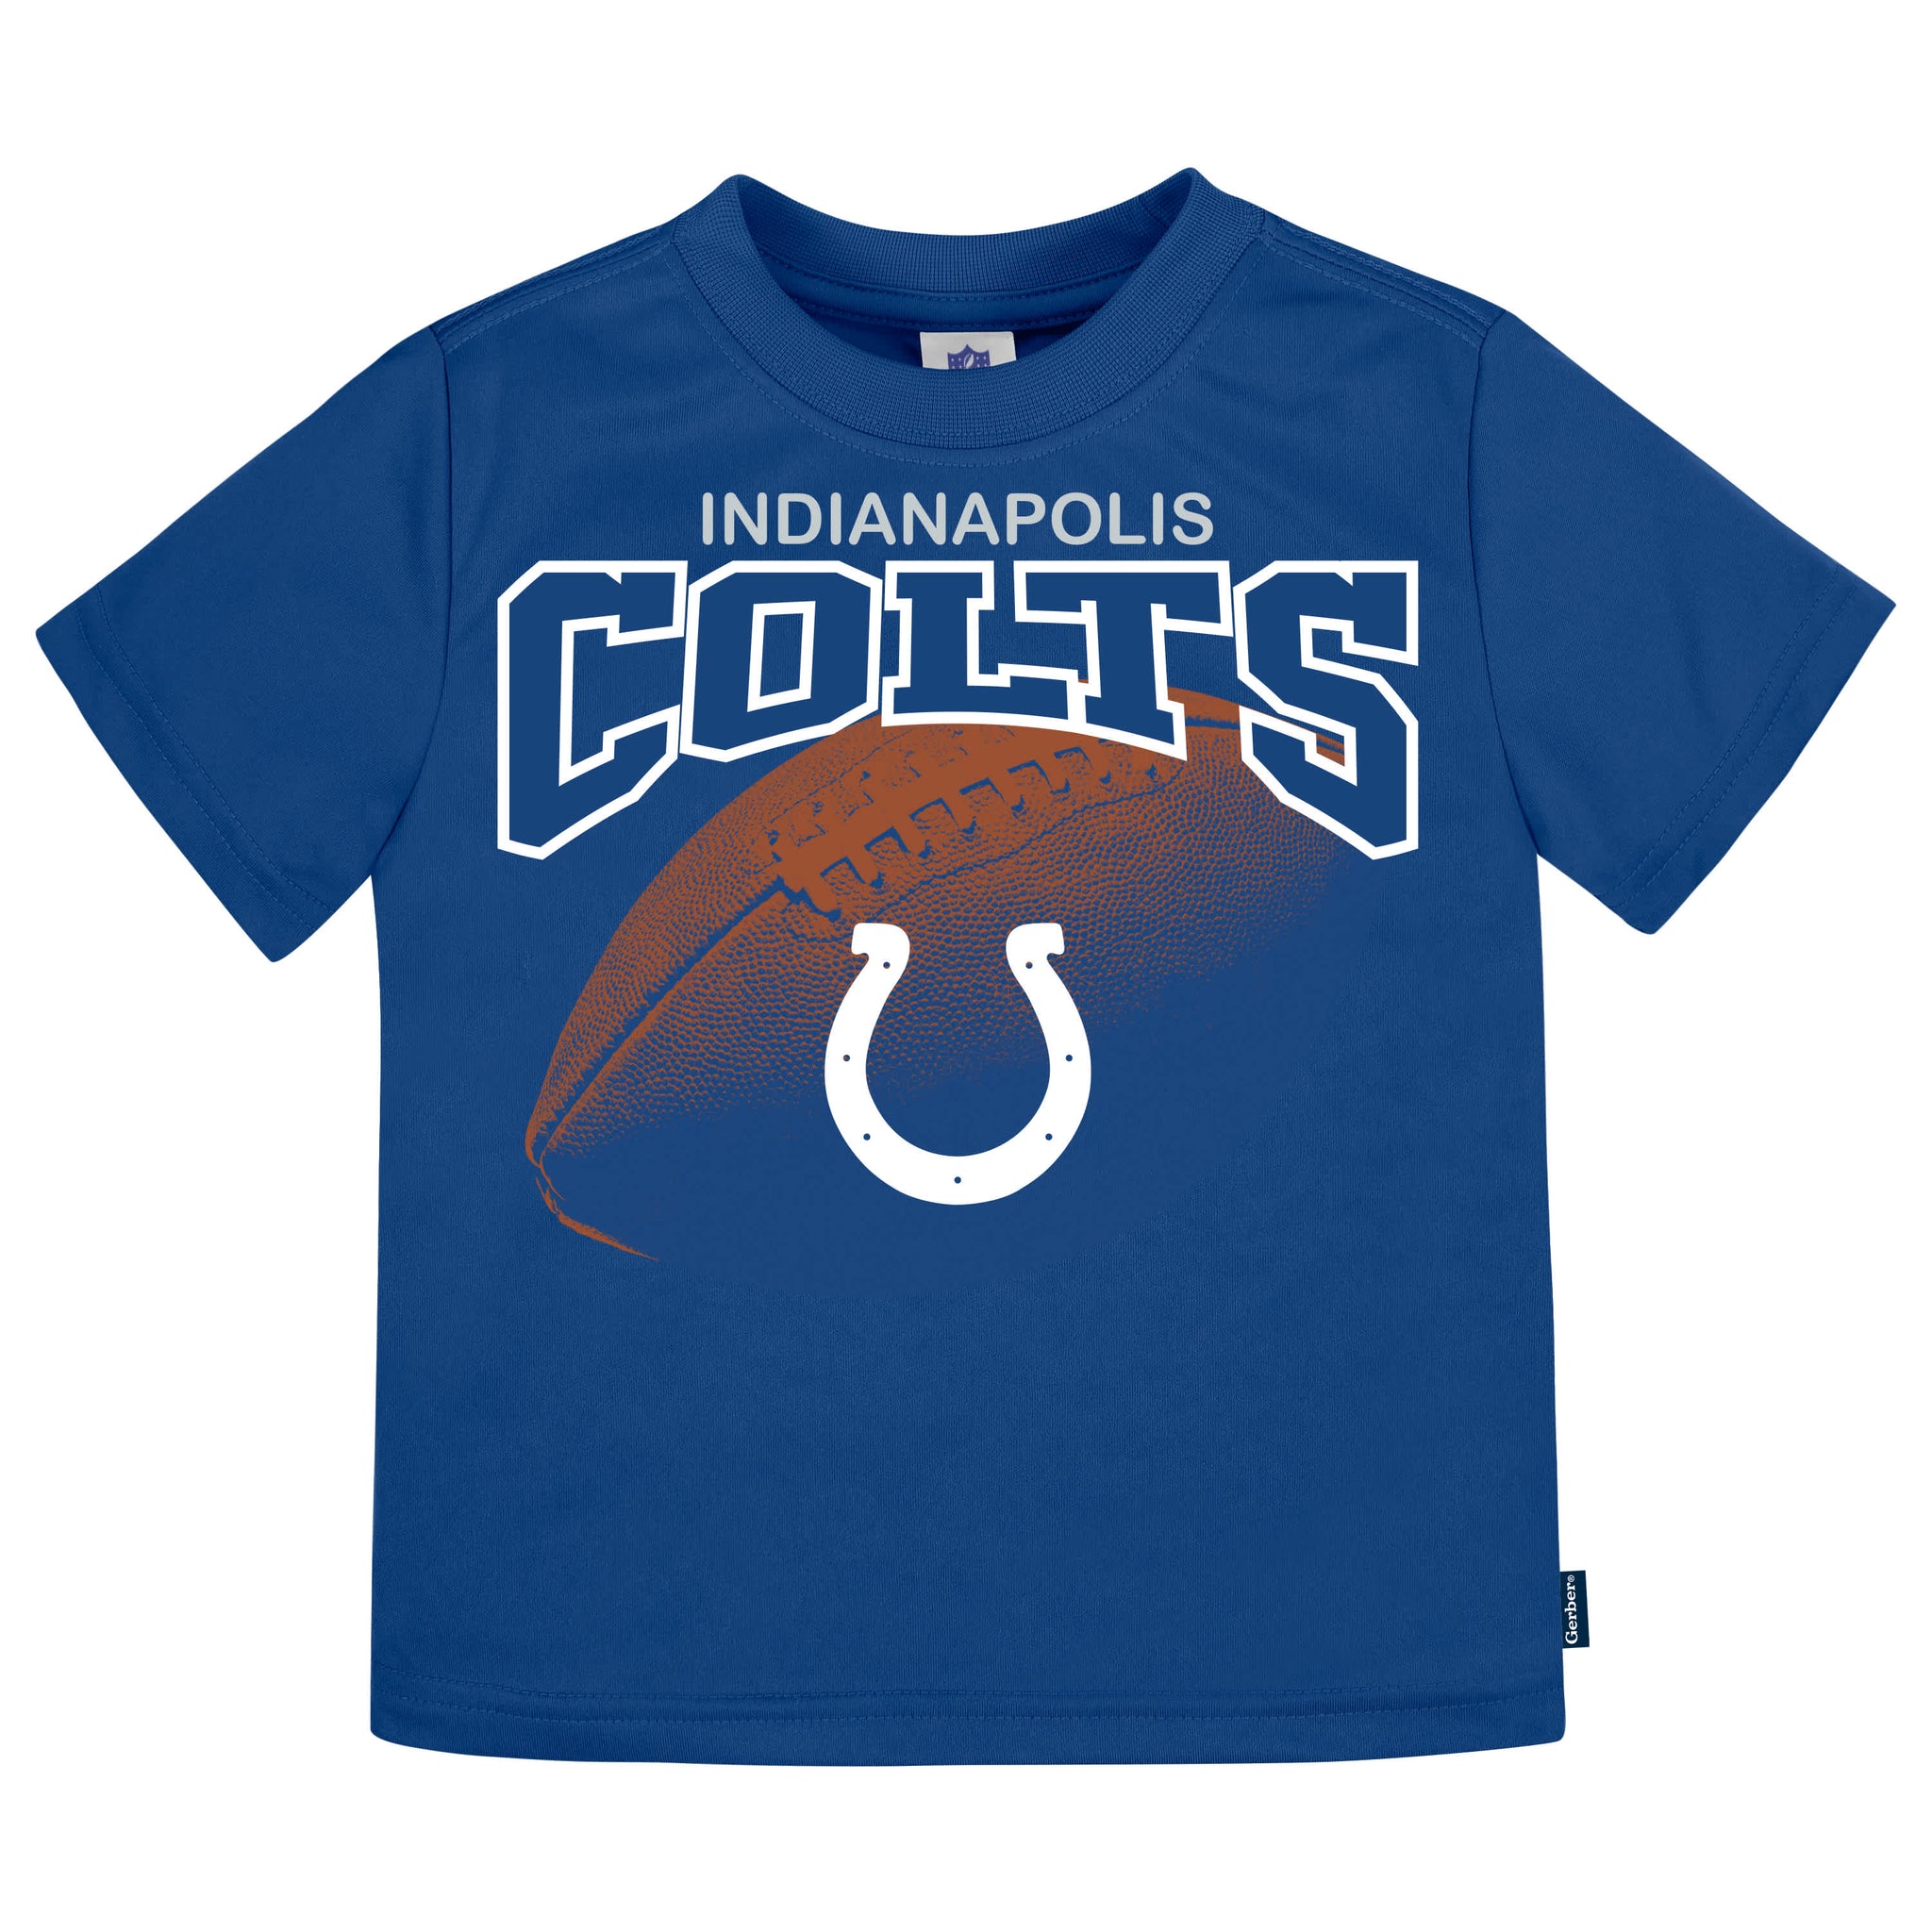 3-Pack Baby & Toddler Boys Colts Short Sleeve Tees-Gerber Childrenswear Wholesale